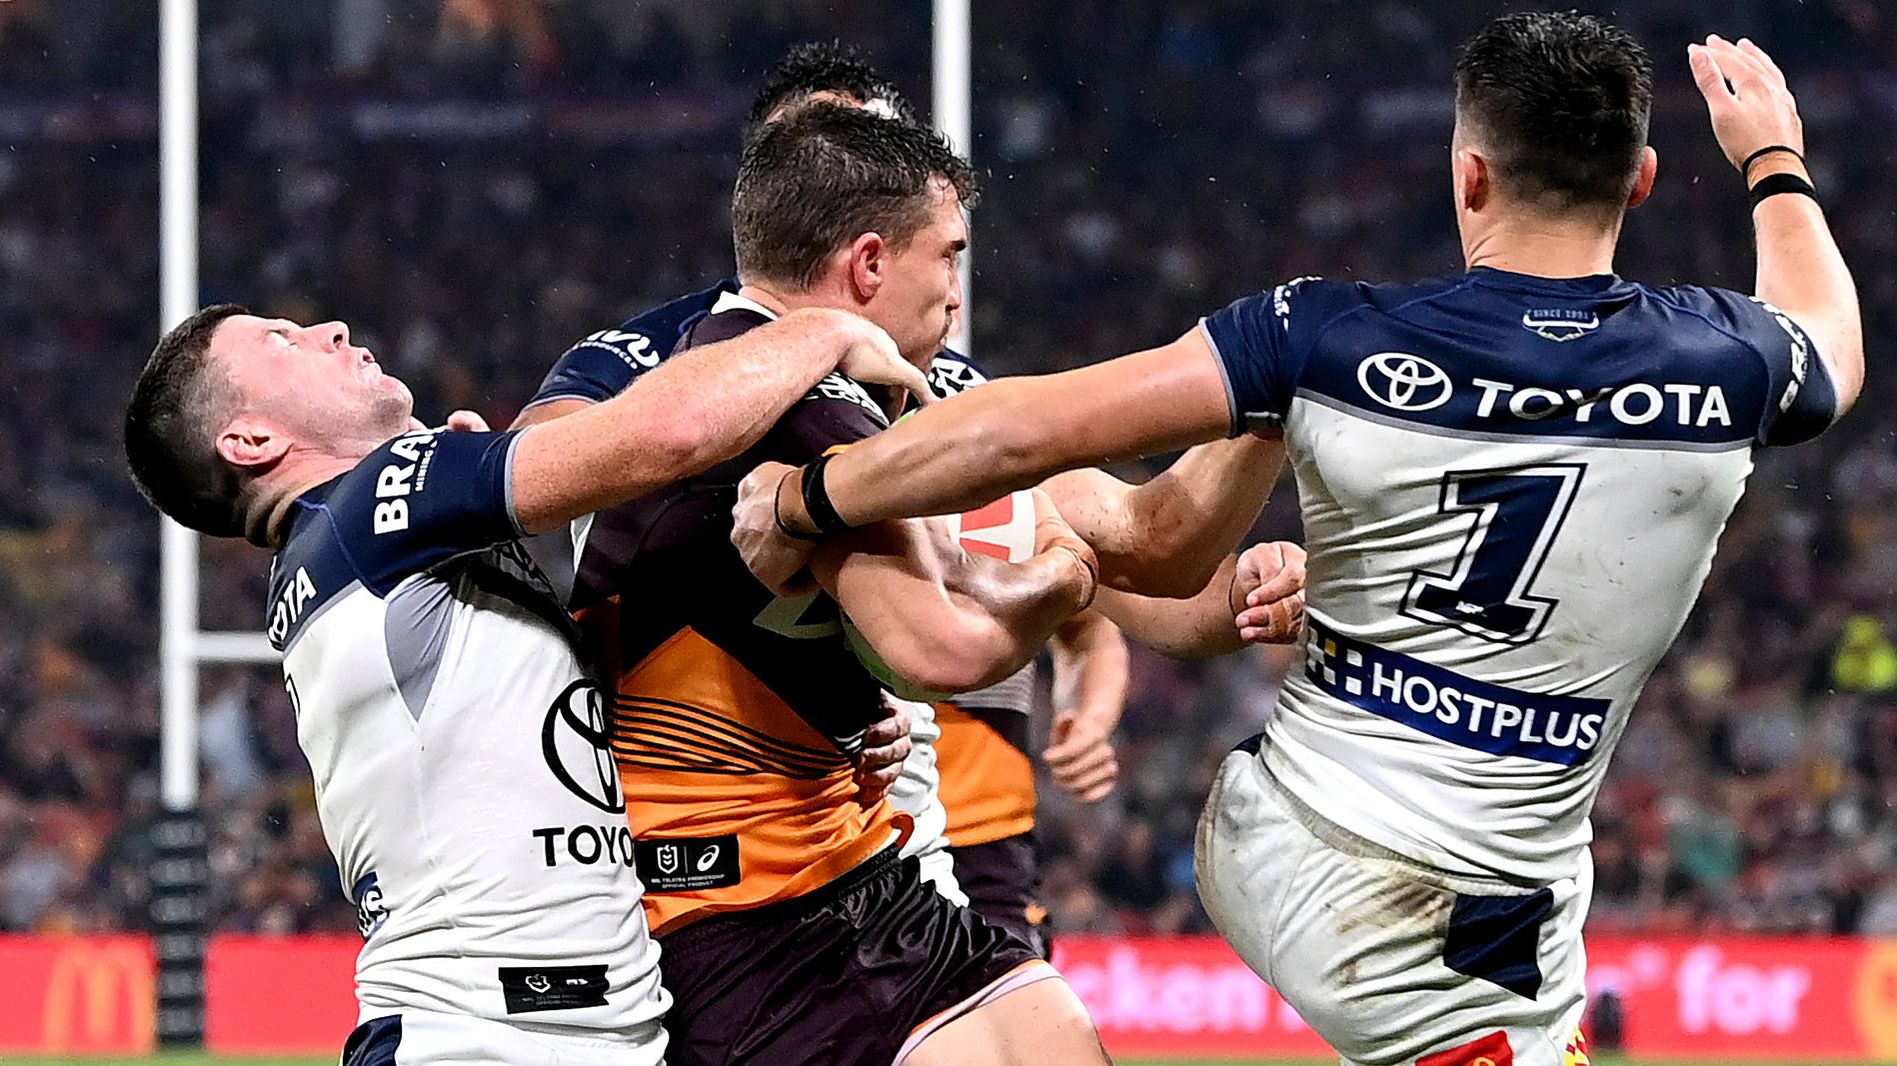 Corey Oates of the Broncos is tackled during the round 2 NRL match between the Brisbane Broncos and the North Queensland Cowboys at Suncorp Stadium on March 10, 2023 in Brisbane, Australia. (Photo by Bradley Kanaris/Getty Images)